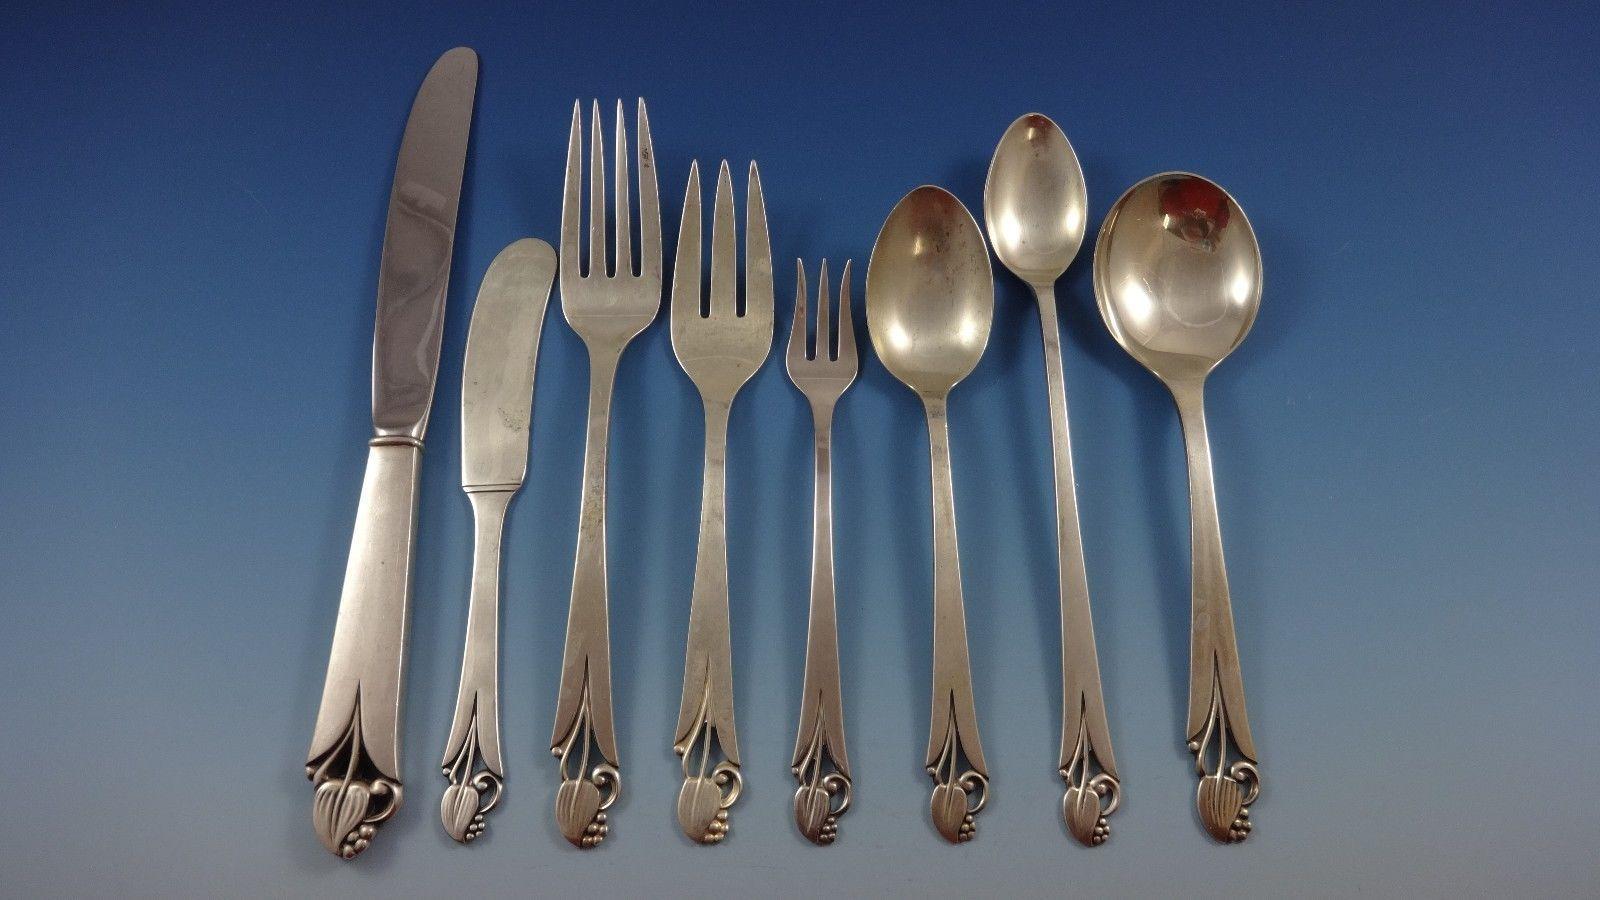 Woodlily by Frank Smith (Glossy finish) sterling silver flatware set of 69 pieces. This graceful pattern features a 